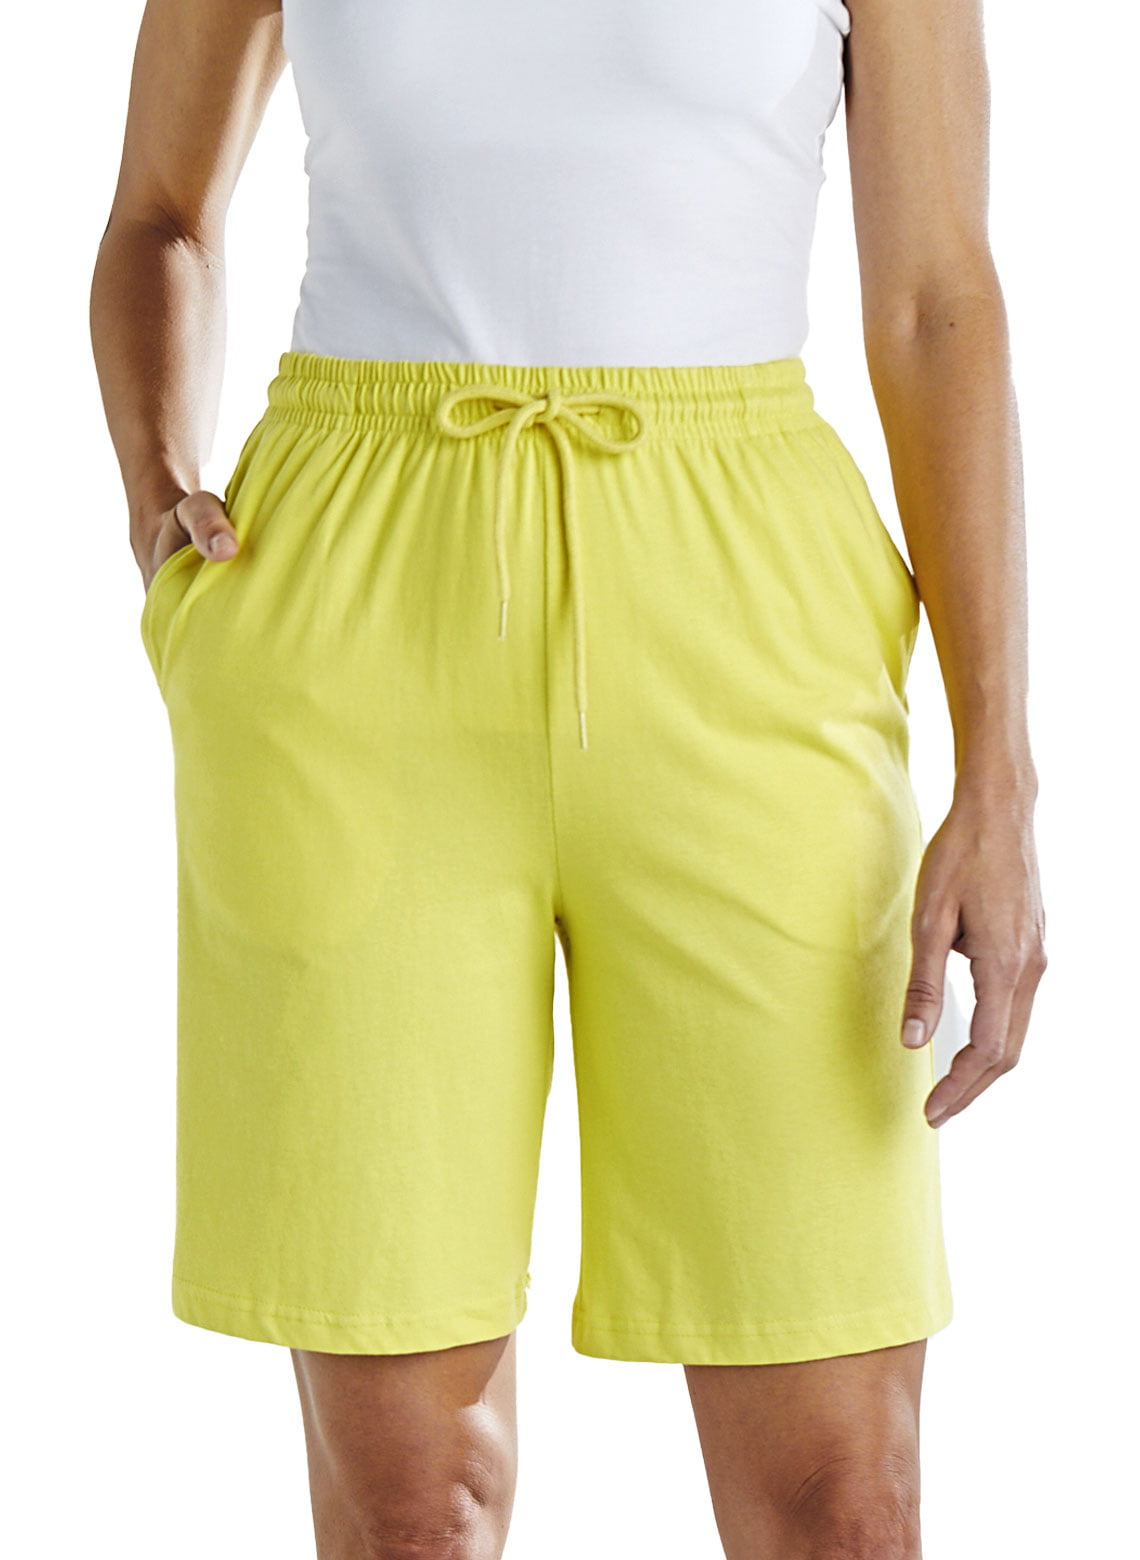 Plus Size Knit Shorts Women?s Essential Cotton Shorts Available in Missy and Plus 